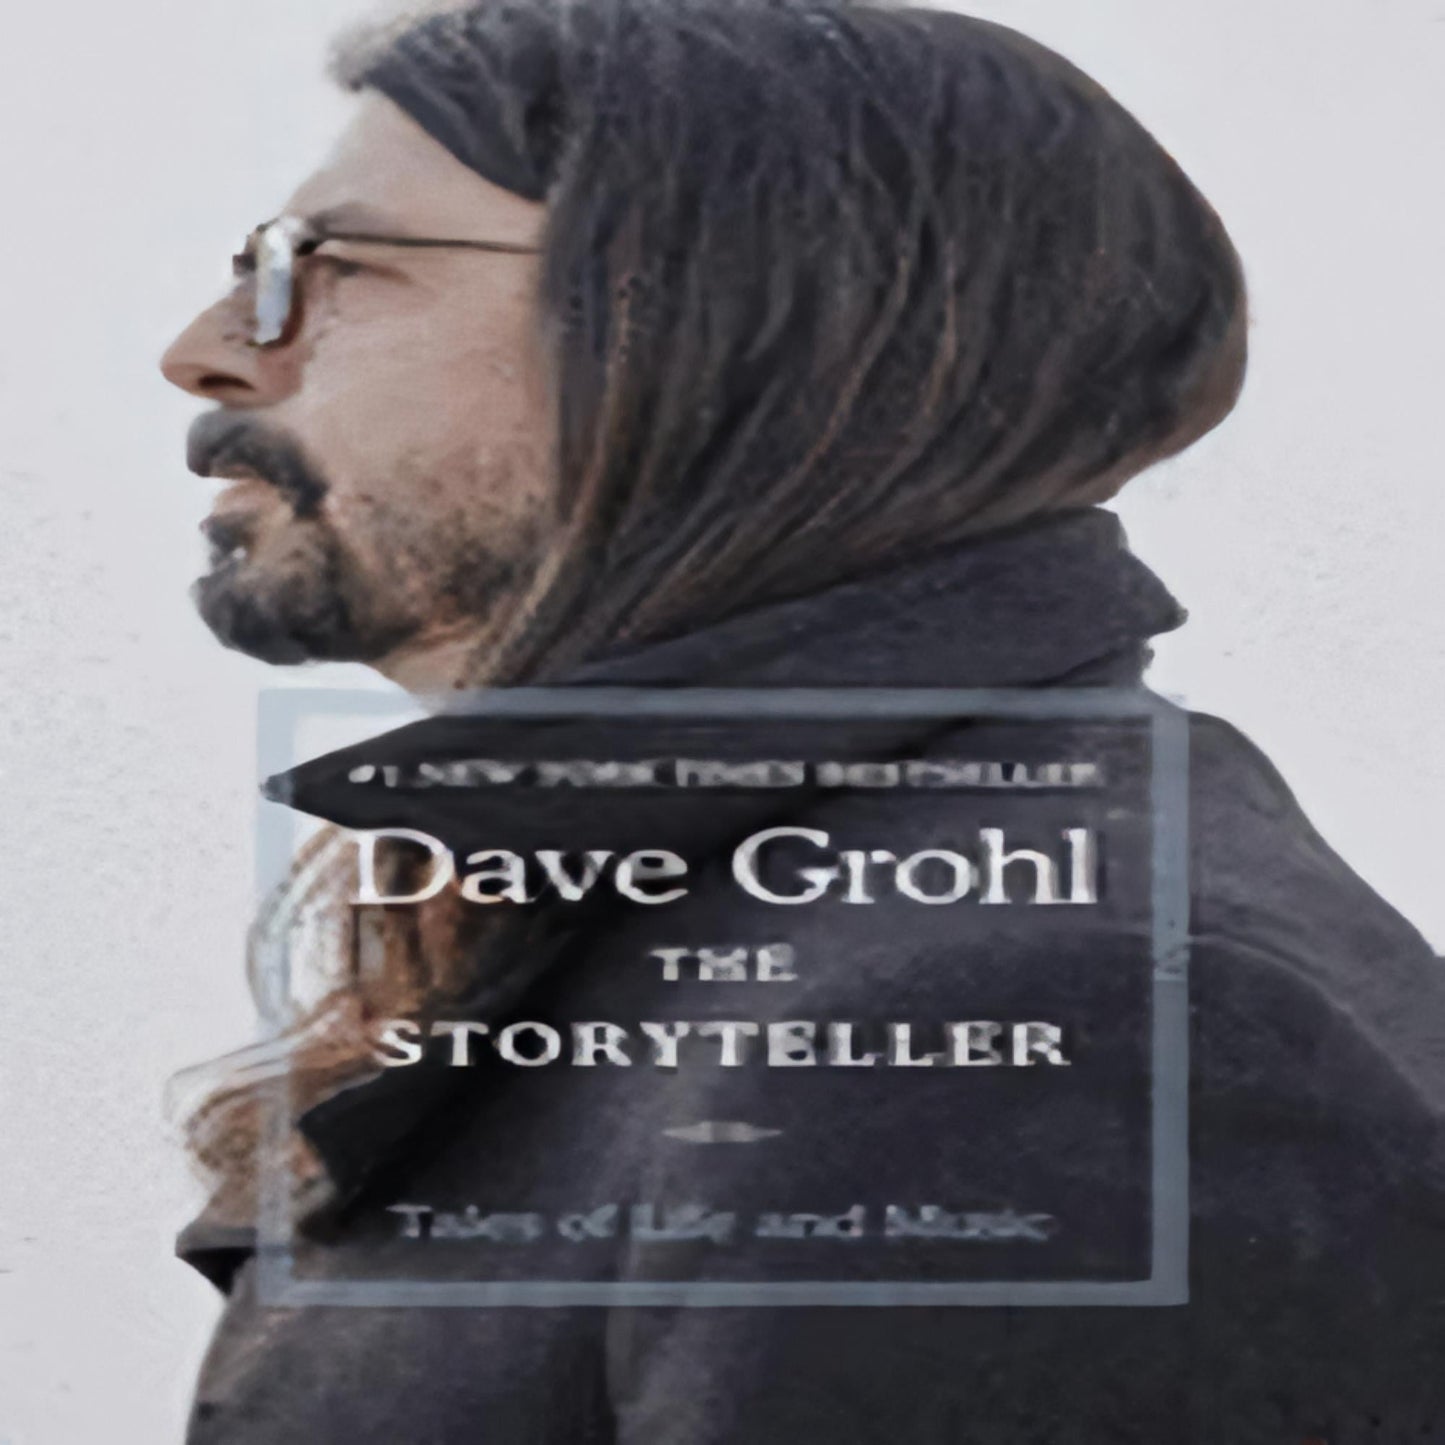 The Storyteller: Tales of Life and Music158-022623-0063076098DPGBOOKSTORE.COM. Today's Bestsellers.